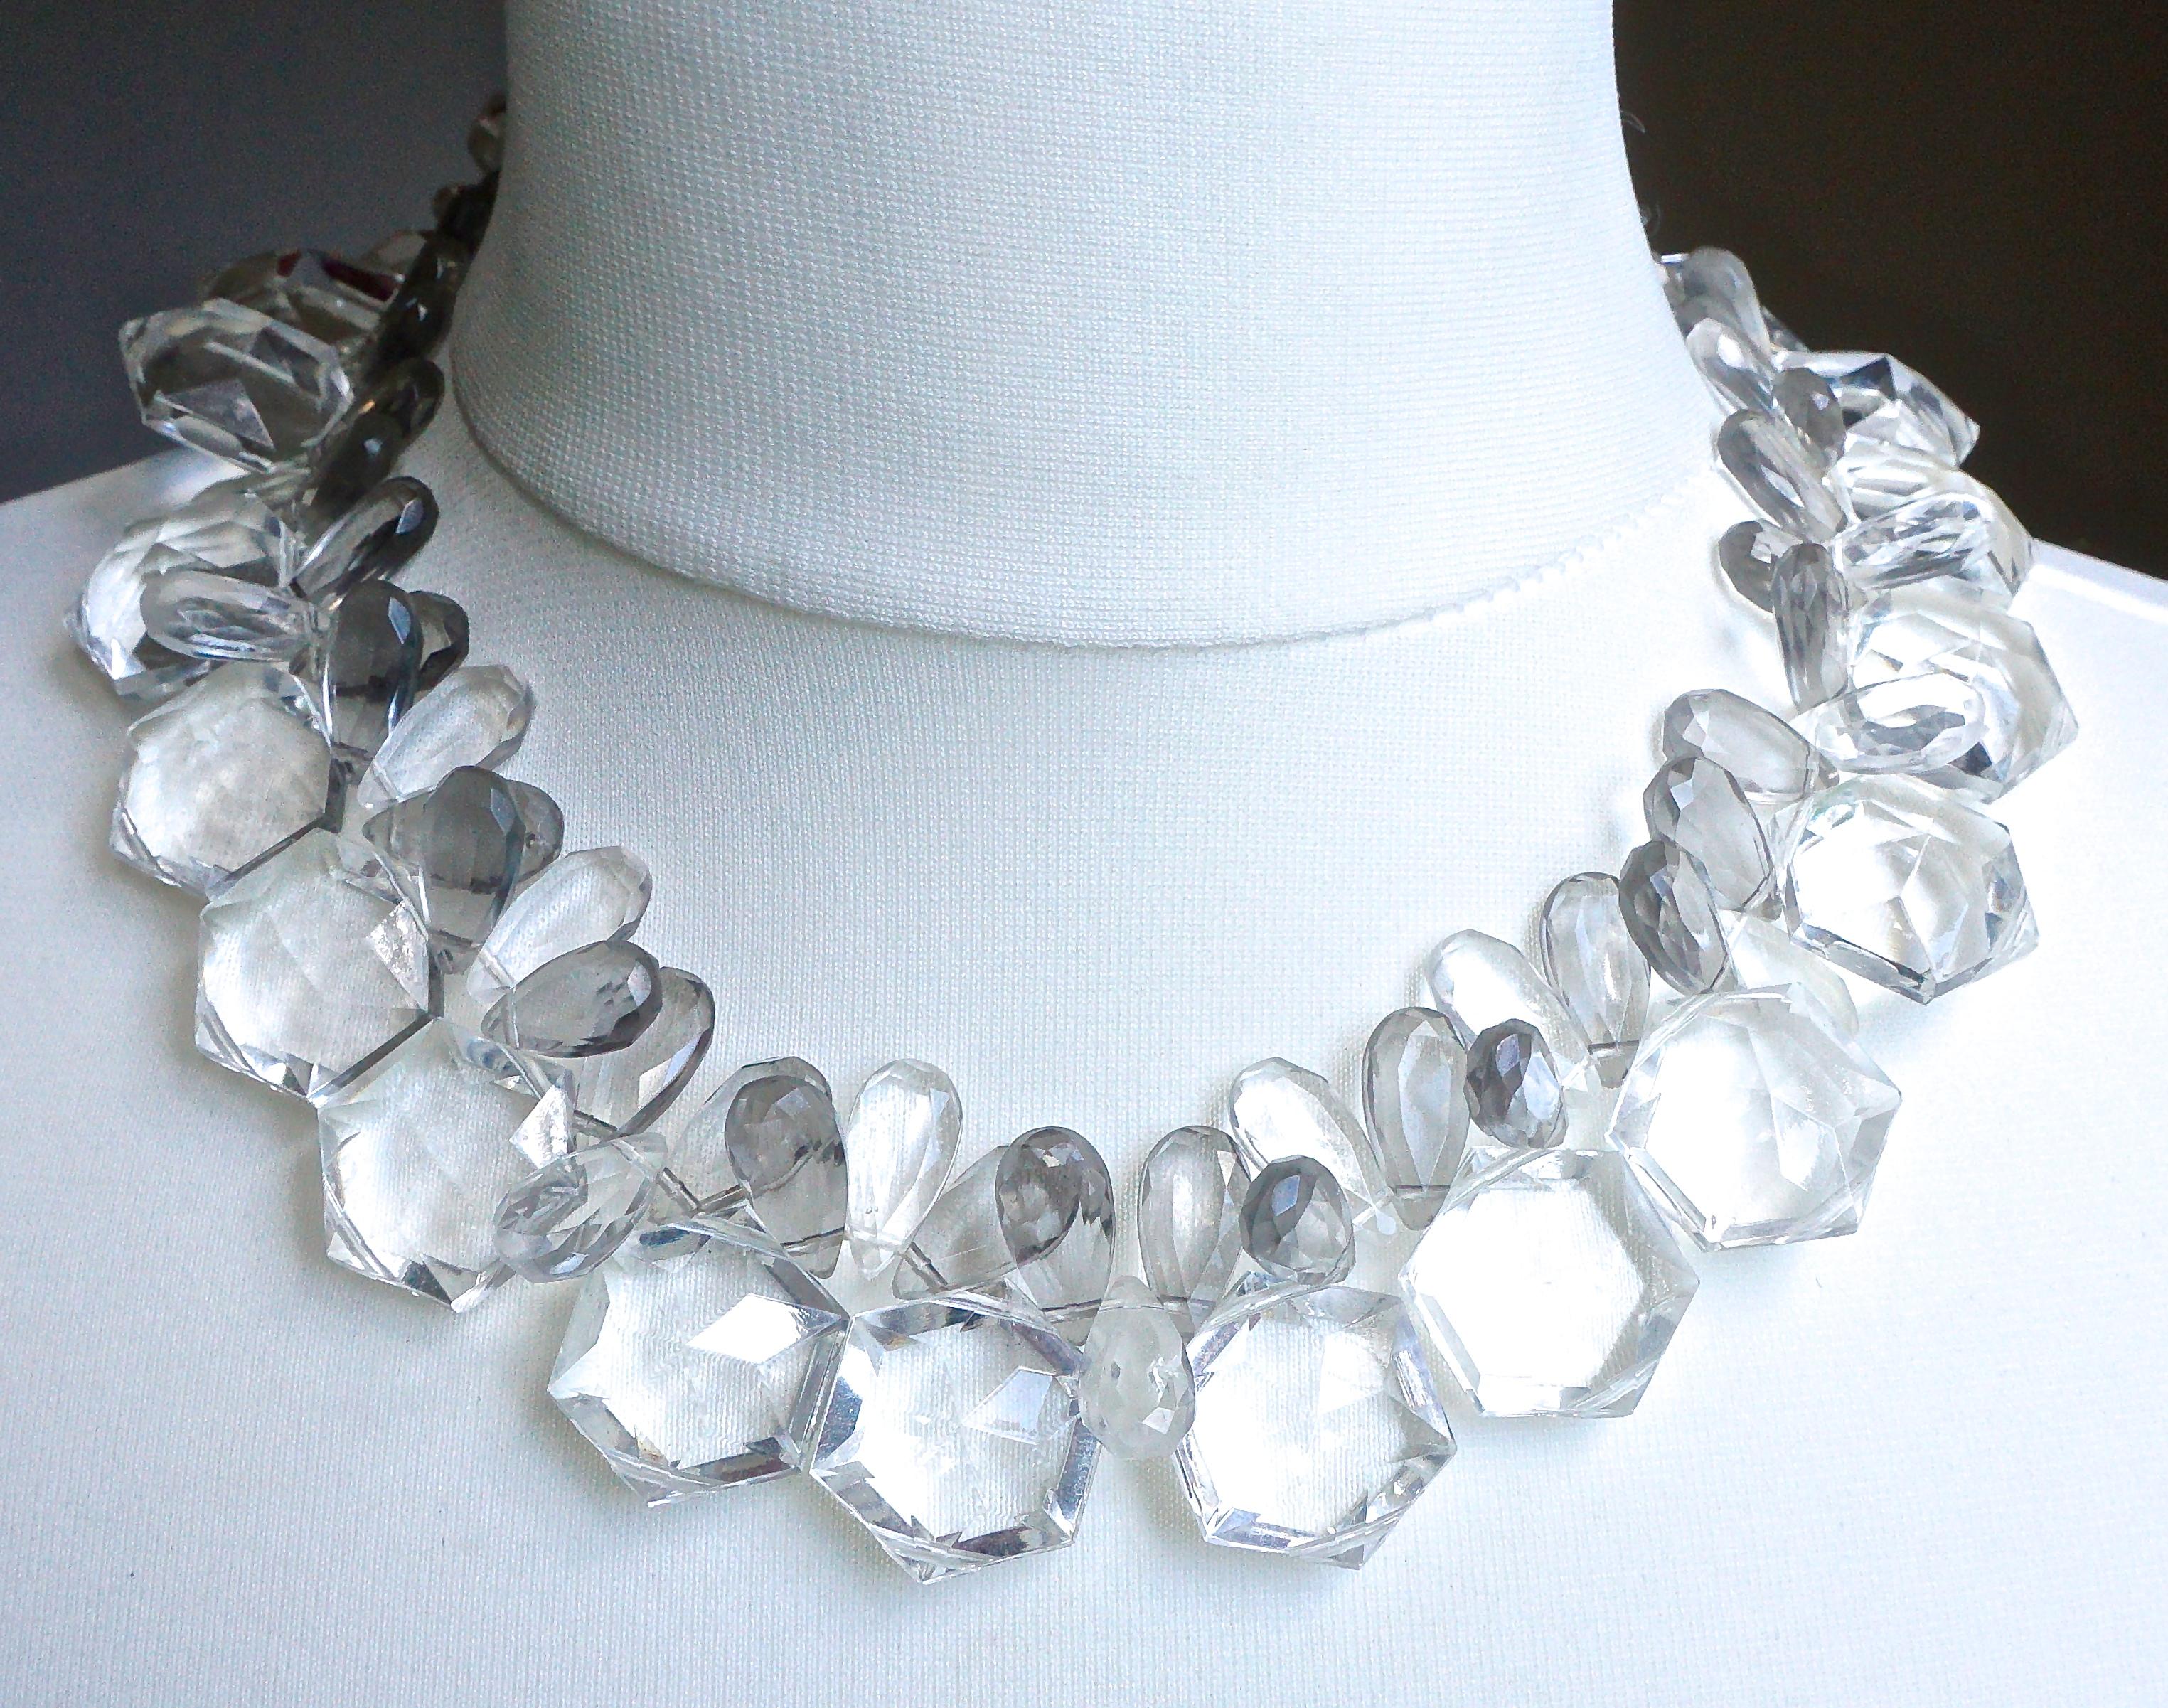 A lovely plastic necklace featuring clear hexagonal and grey teardrop shaped beads, with a silver tone and faceted grey bead push in clasp. The beads are threaded on white string. Measuring length 47.5cm / 18.7 inches, and the hexagonal beads are